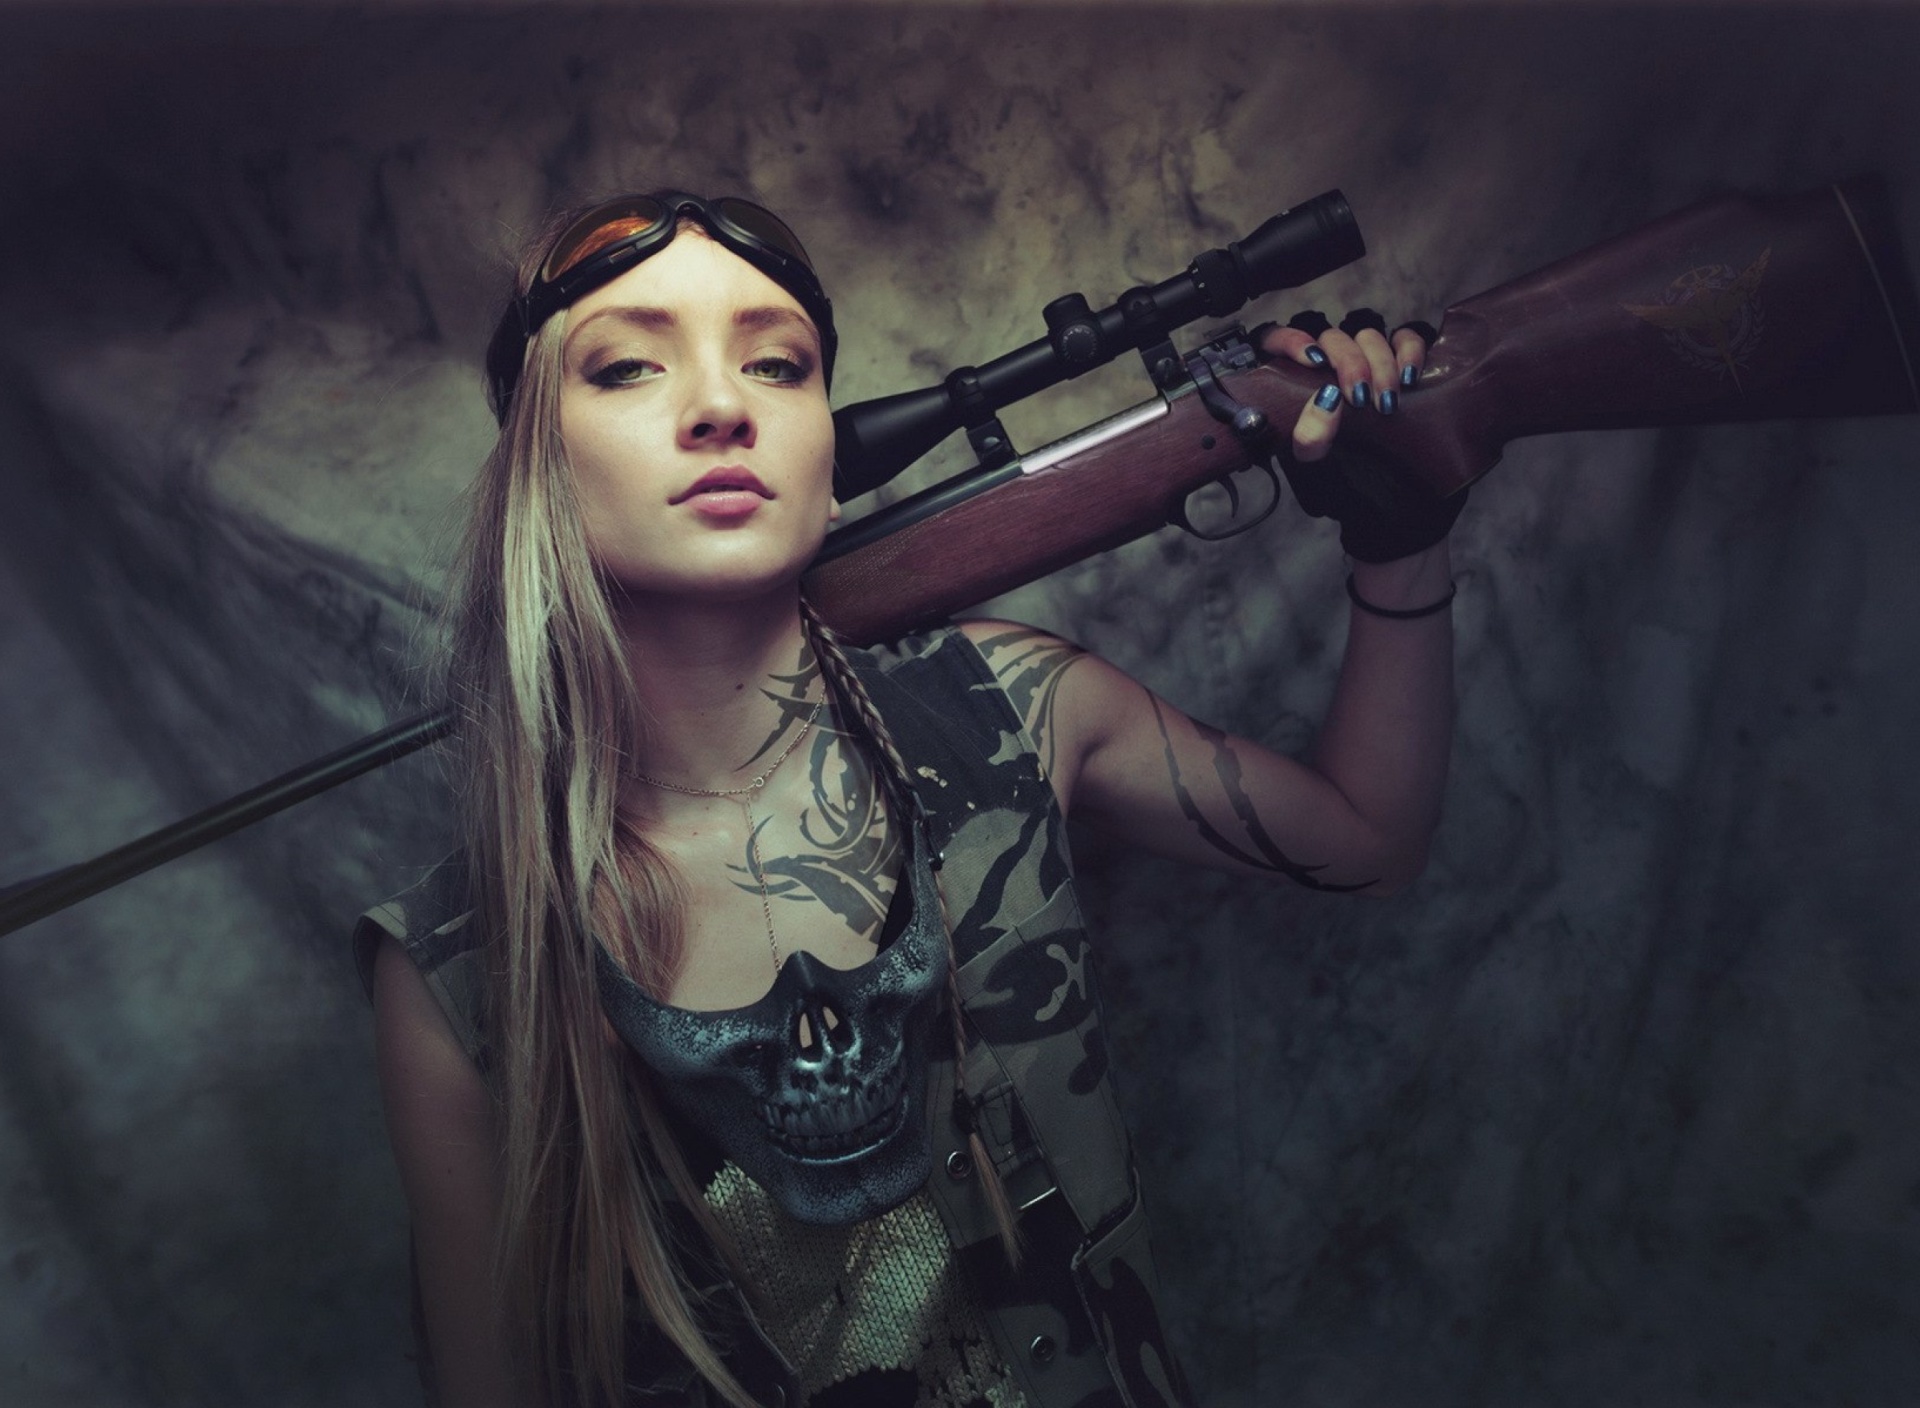 Soldier girl with a sniper rifle screenshot #1 1920x1408